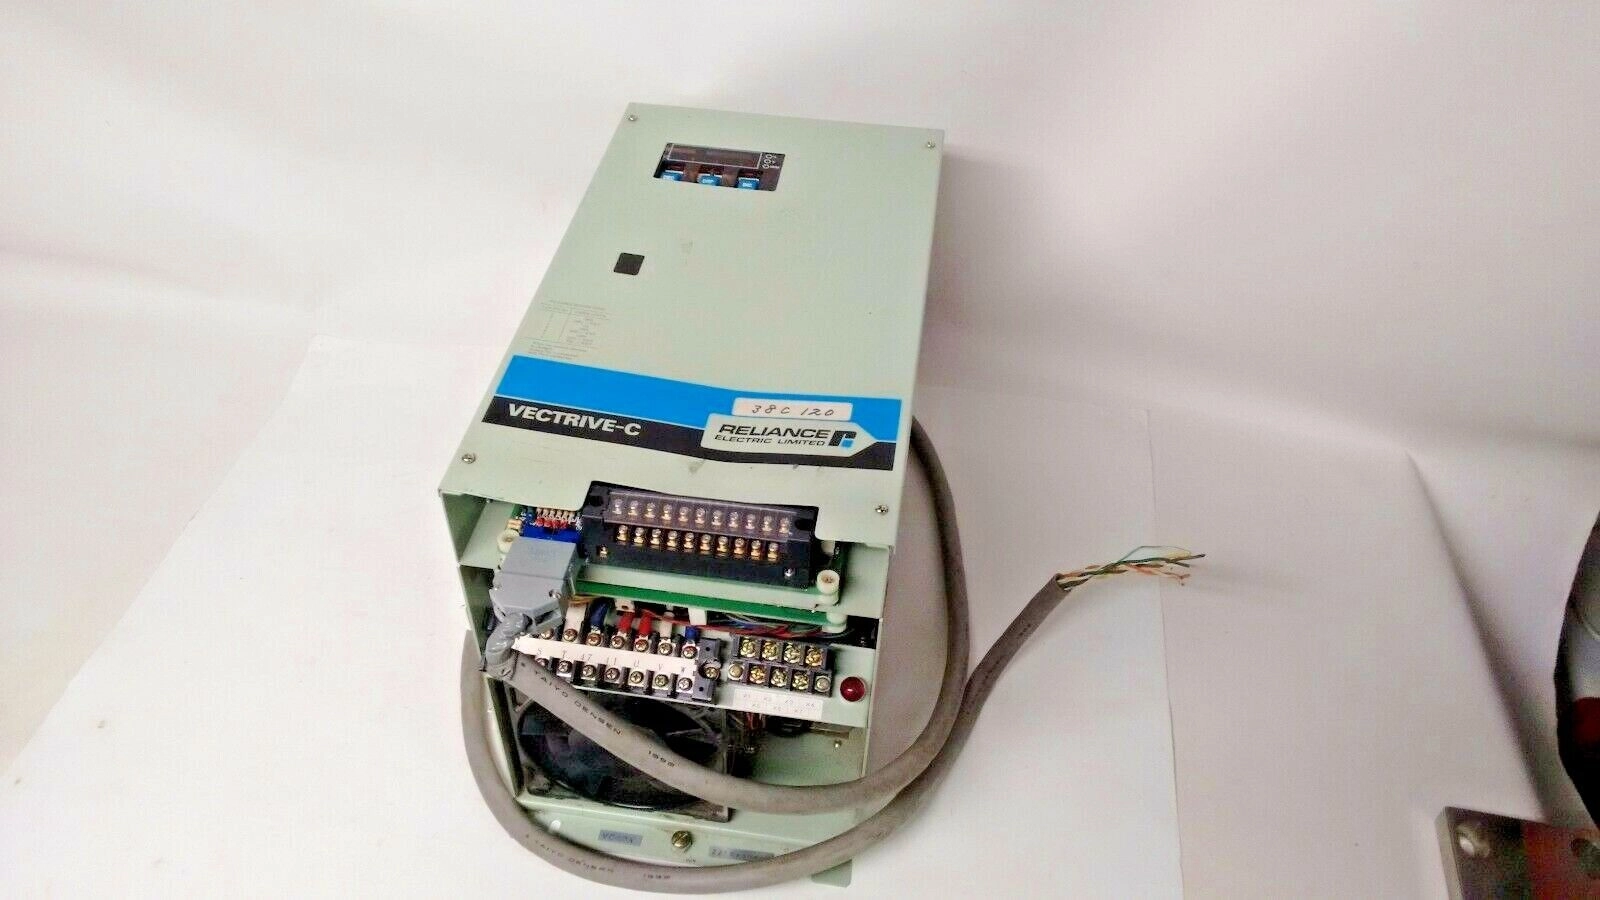 Reliance Electric Limited VC-203A Vectrive-C Drive